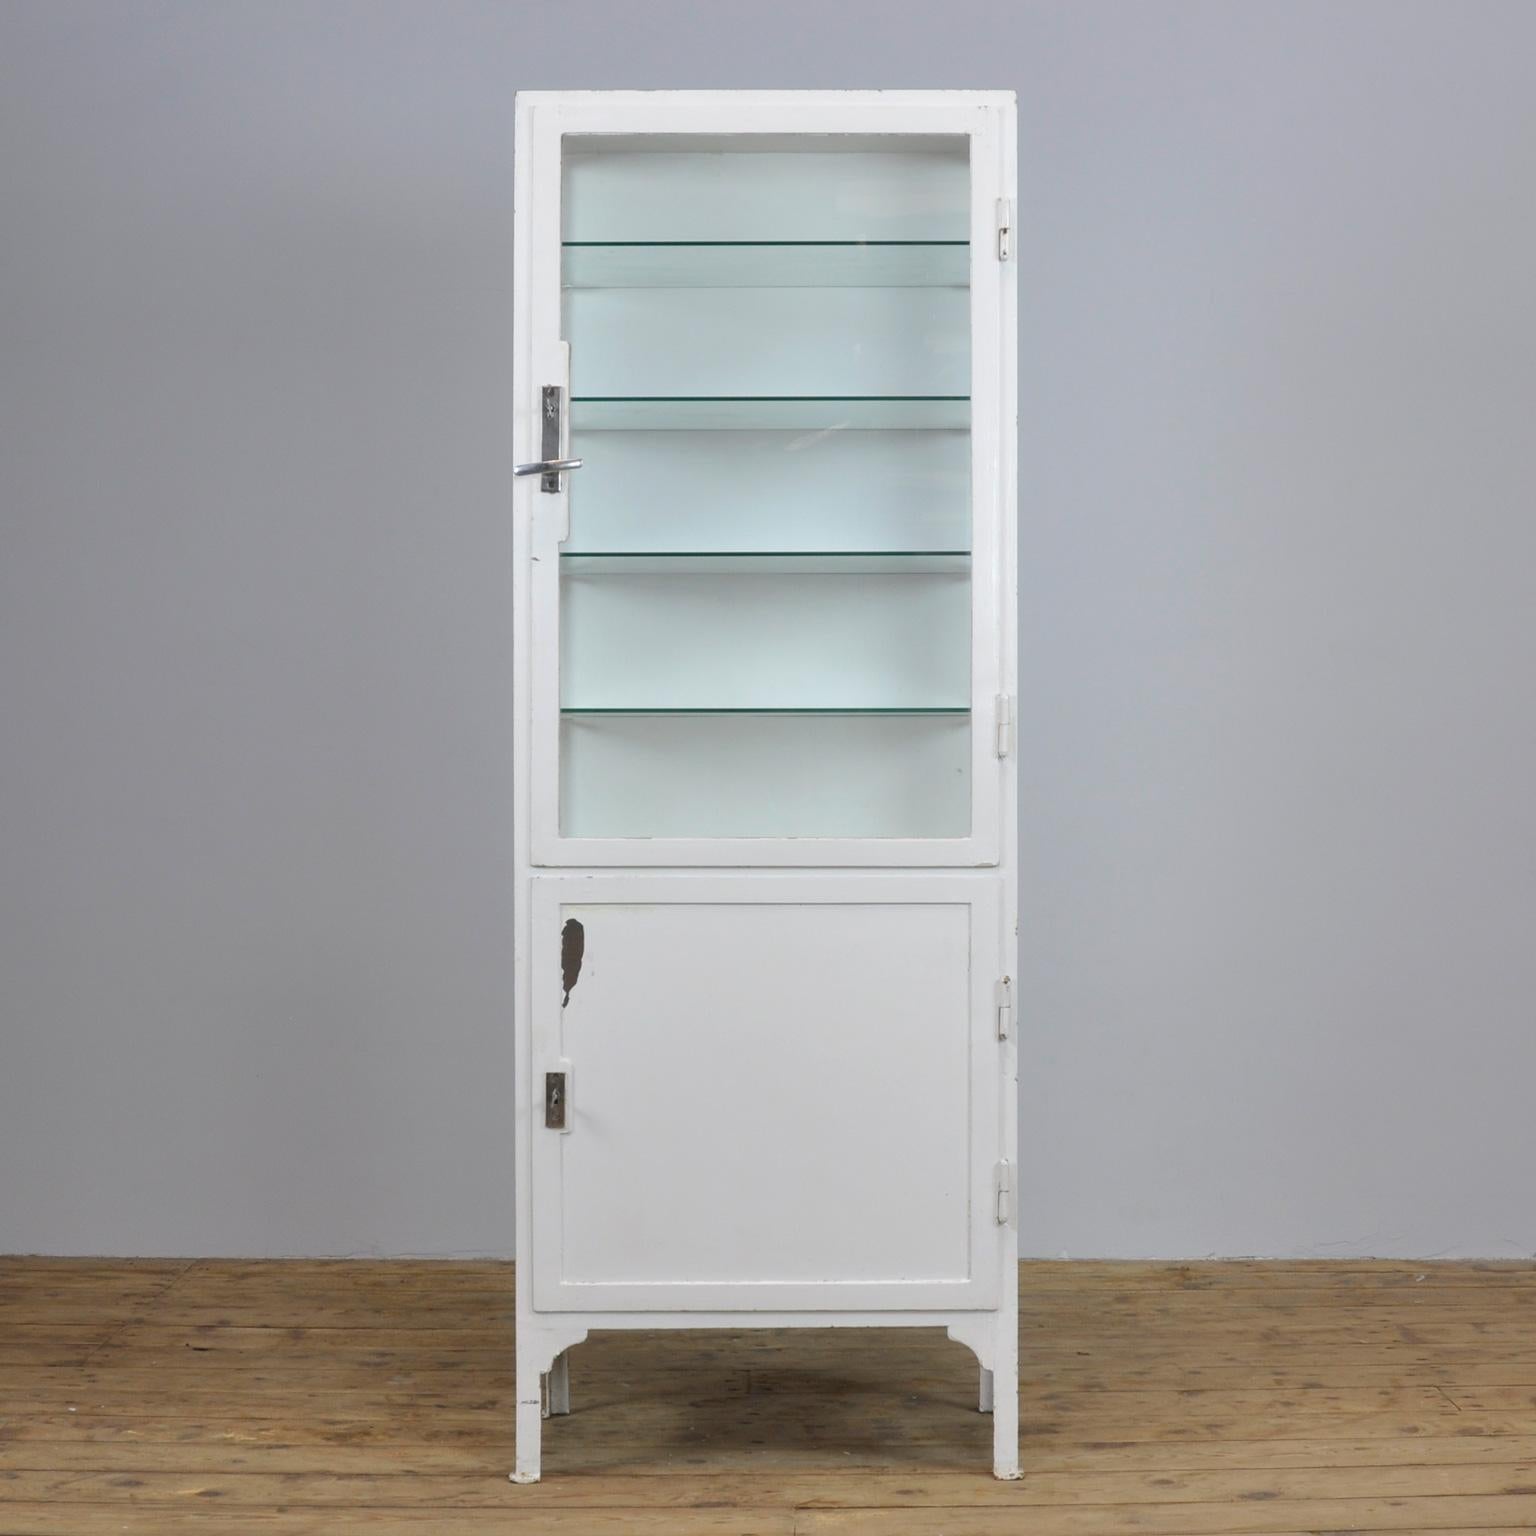 This former medicine cabinet was produced in the 1940s in Hungary and is made from thick iron and antique glass. It features four new glass shelves.